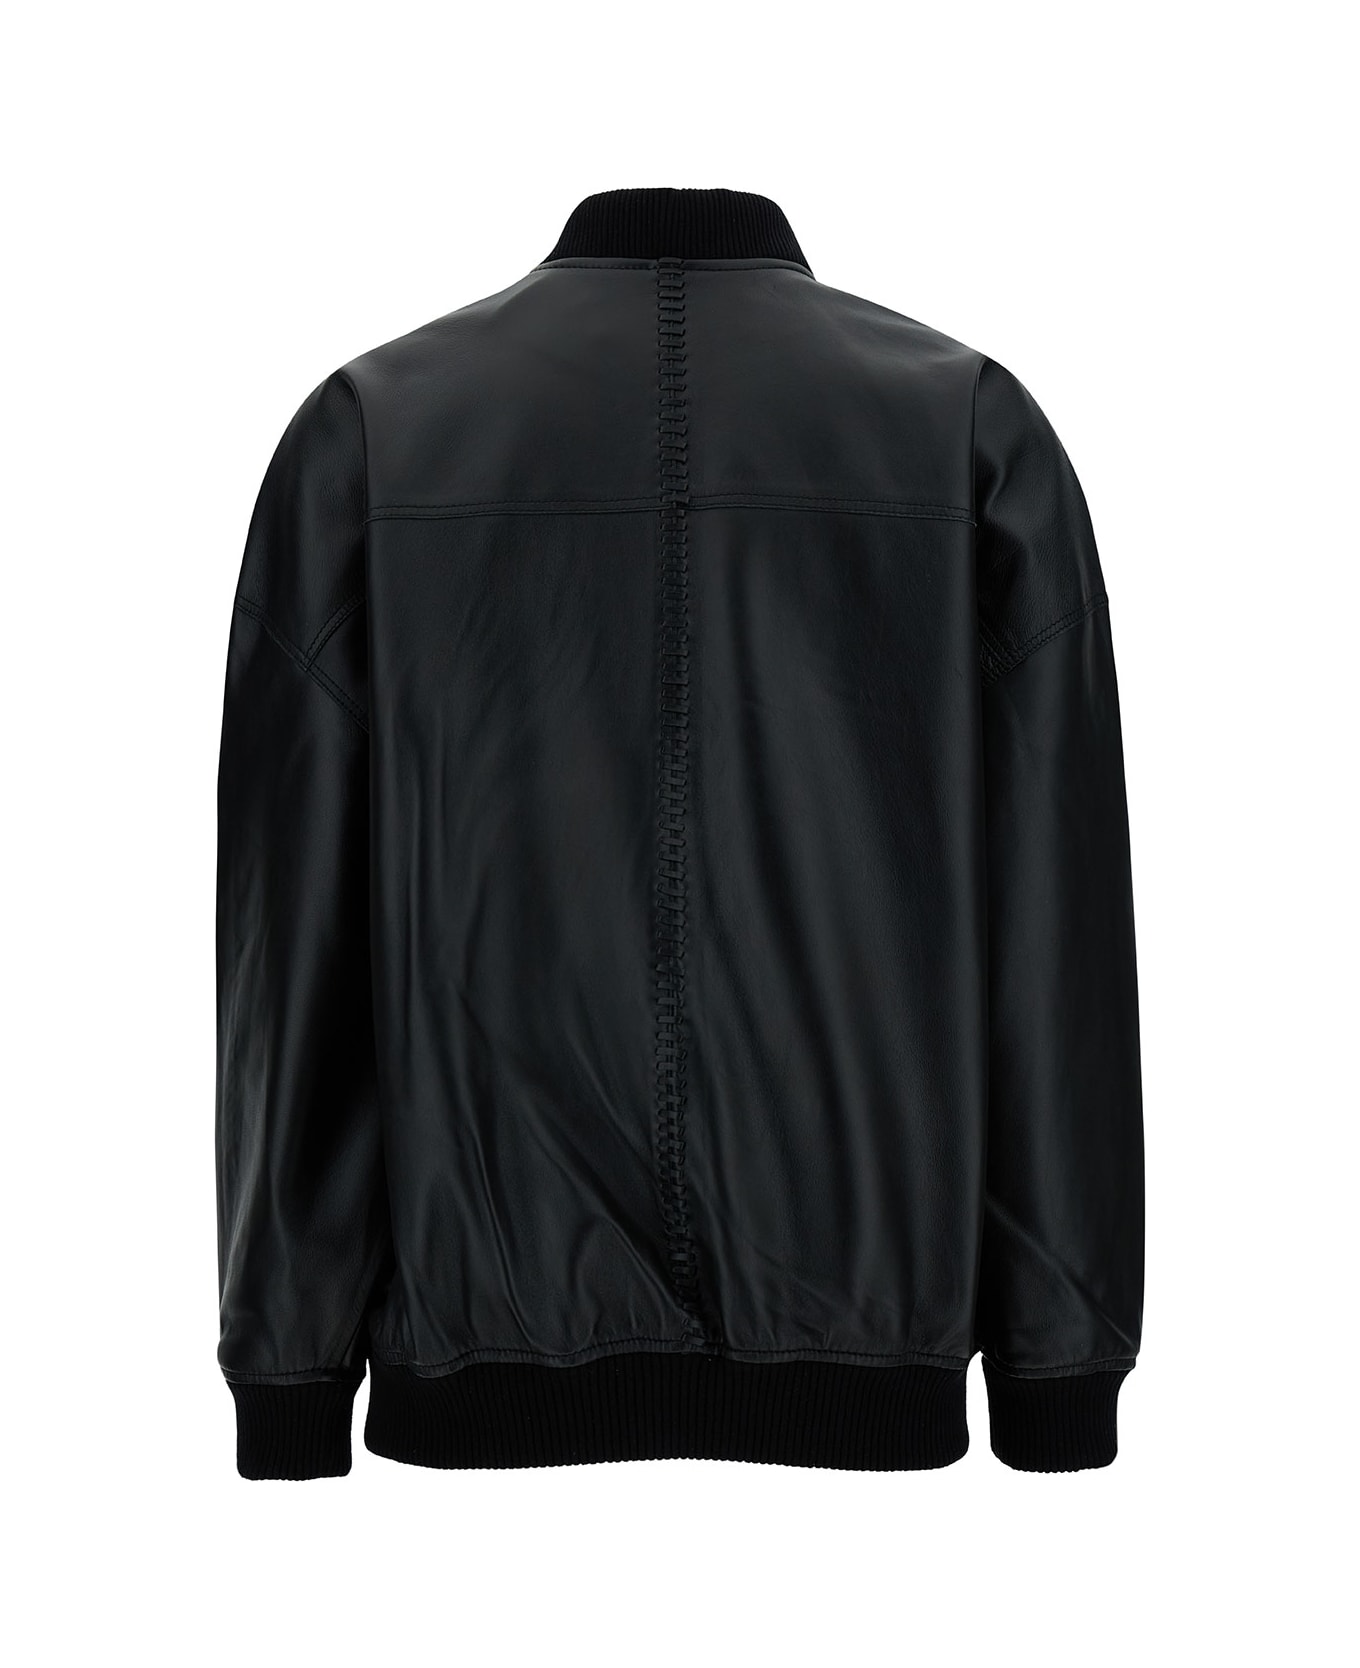 Federica Tosi Black Bomber Jacket With Ribbed Trim In Leather Woman - Black